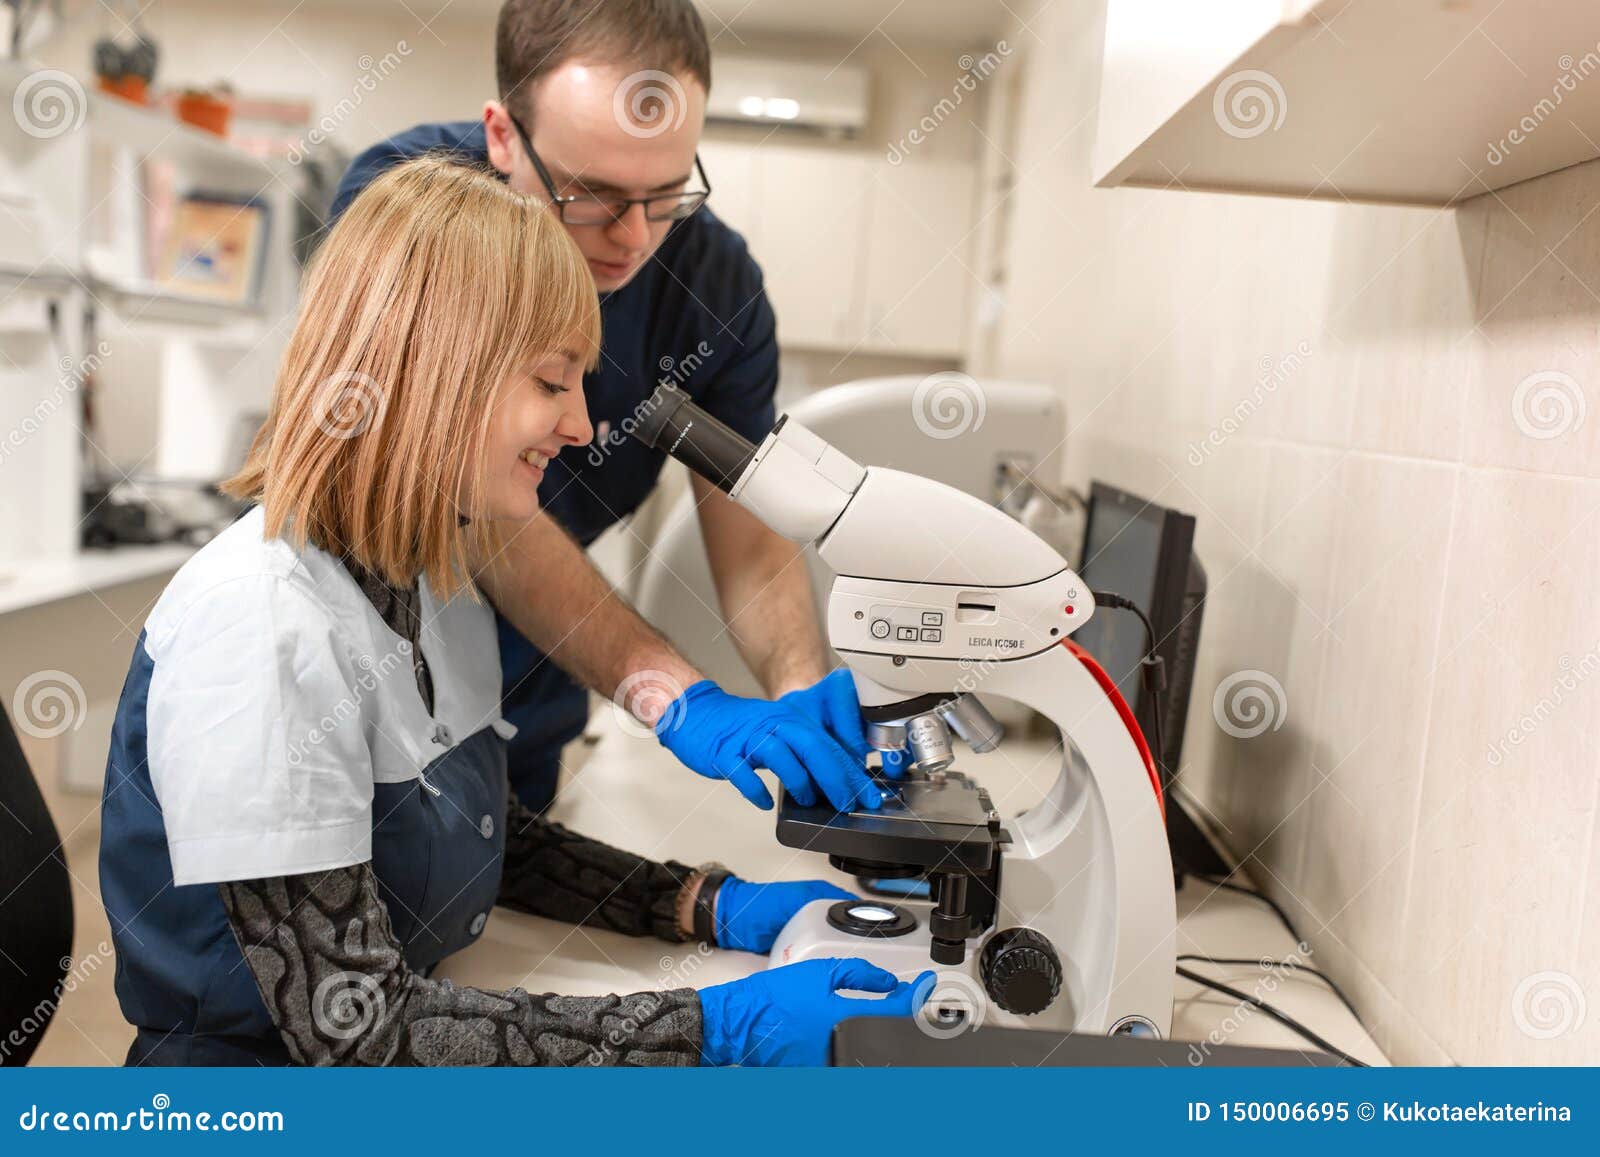 283 Laboratory Assistants Photos - Free & Royalty-Free Stock Photos from  Dreamstime